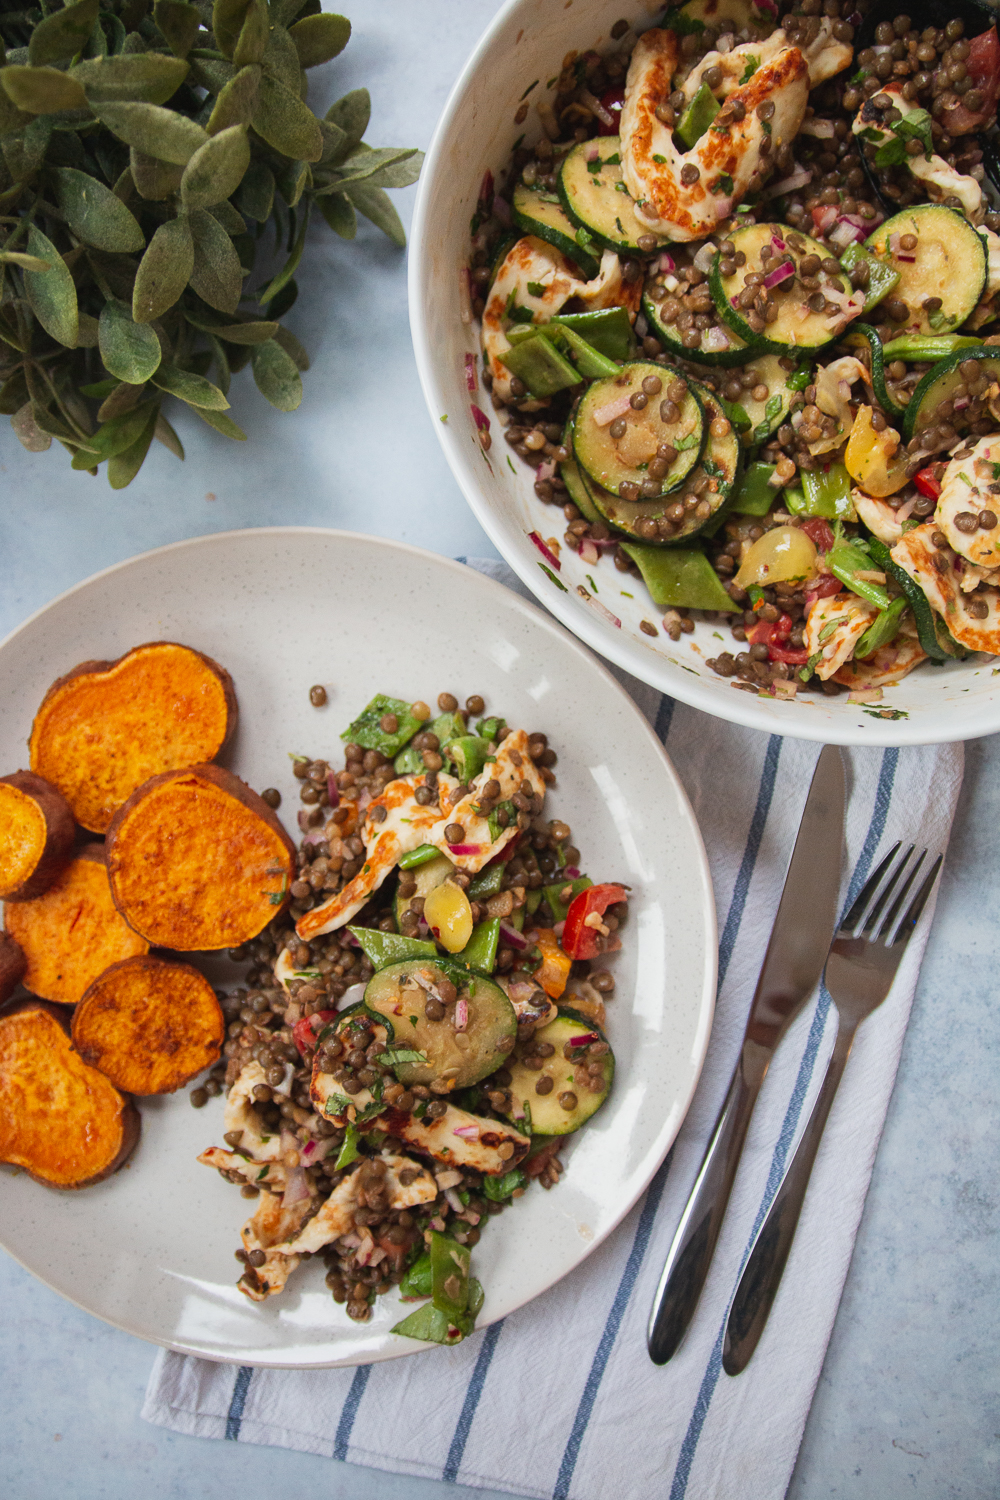 Summer Courgette, Lentil & Halloumi Salad, served with Roasted Sweet Potato Circles